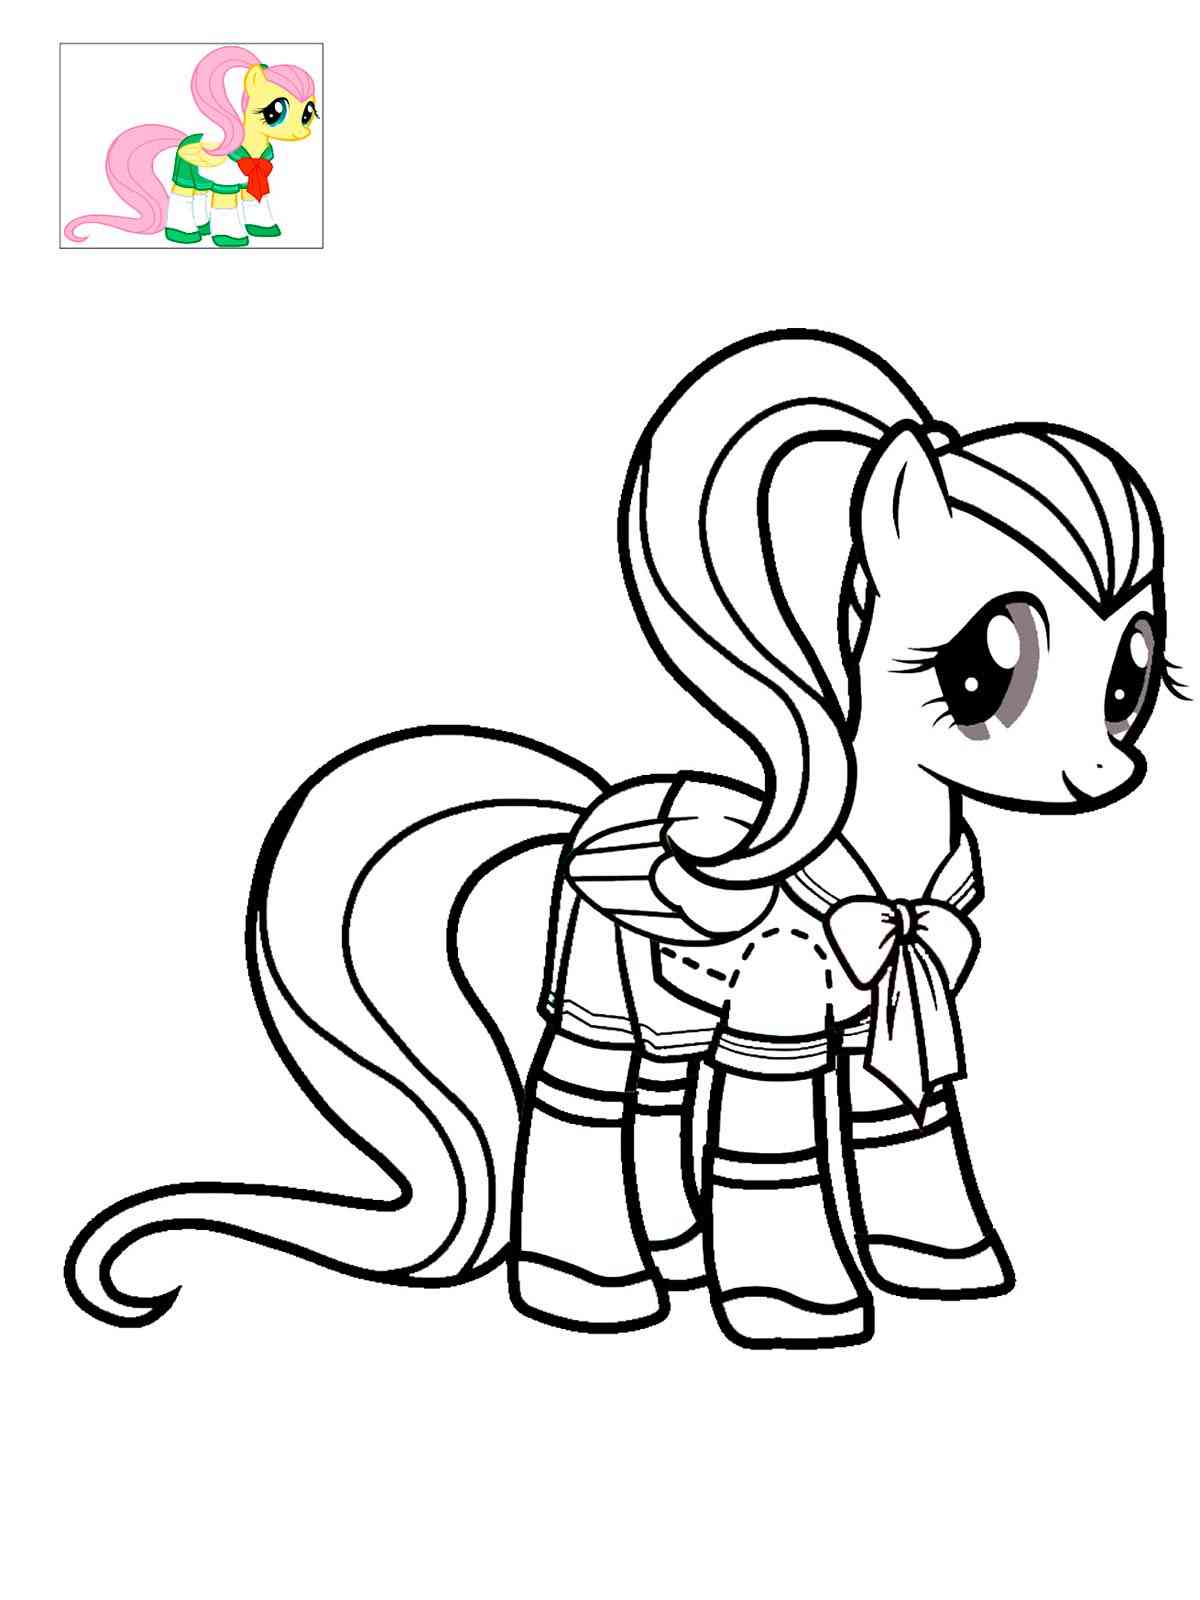 Fluttershy 9 coloring page